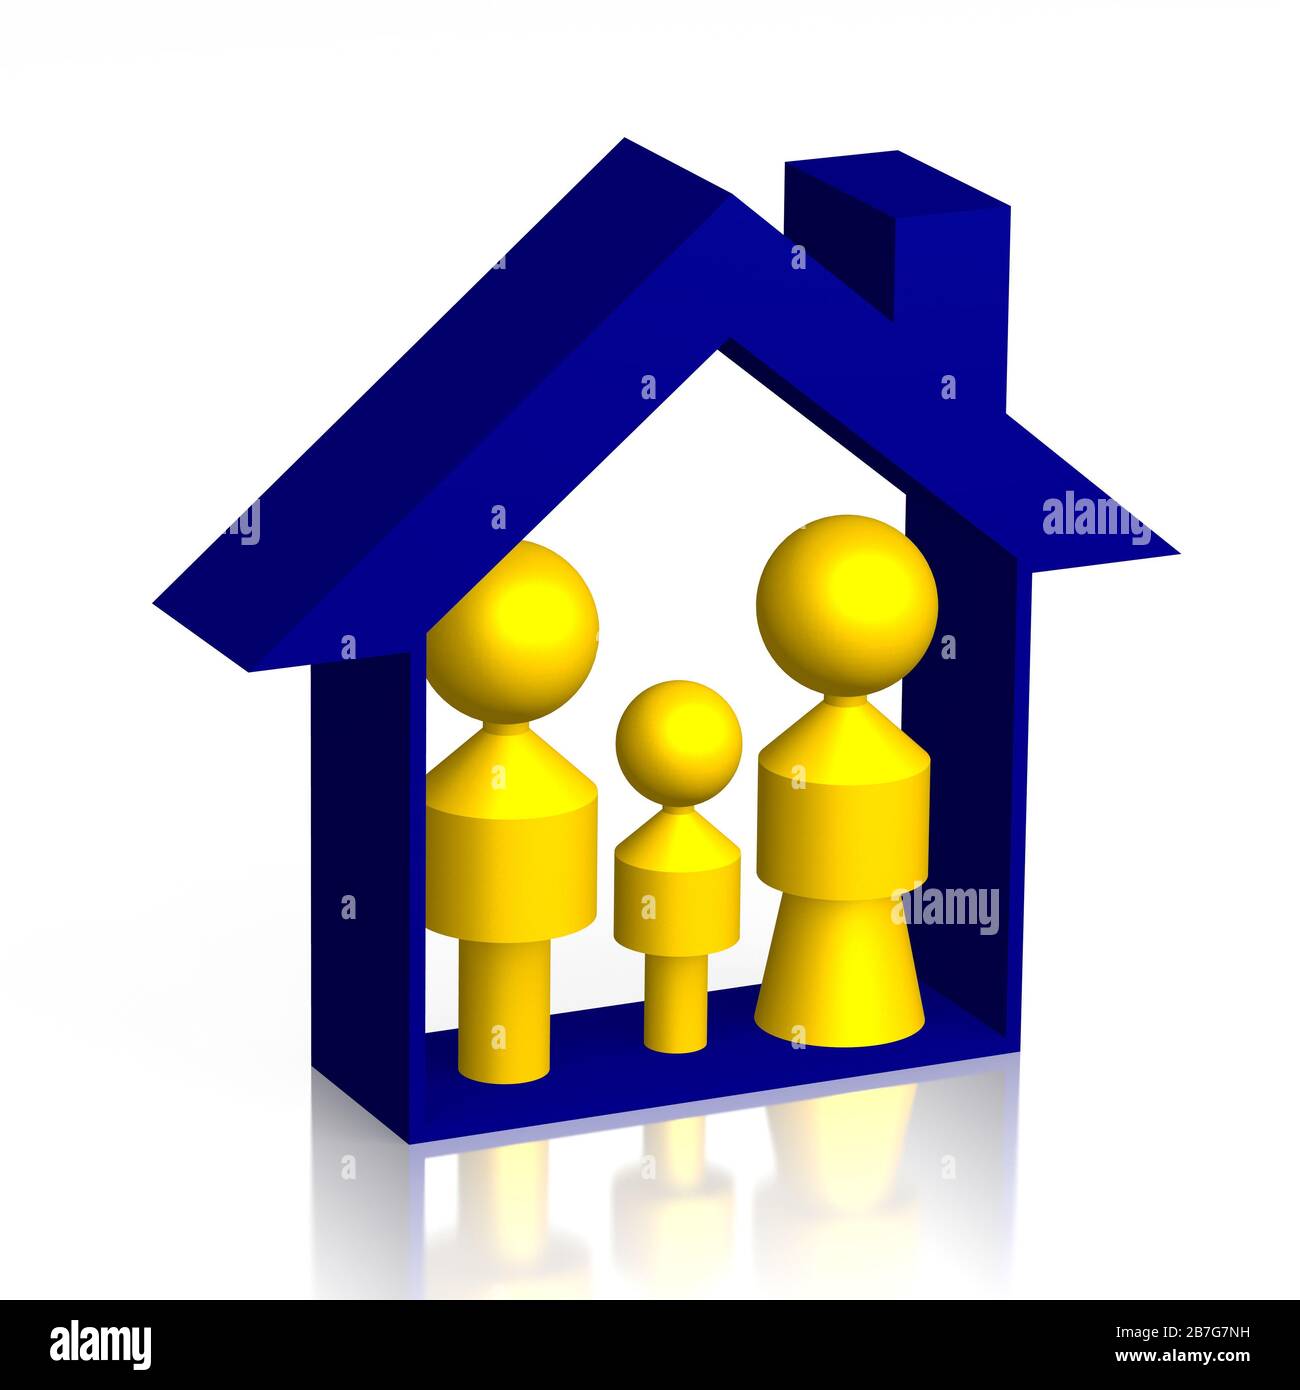 3D house and family shapes - illustration Stock Photo